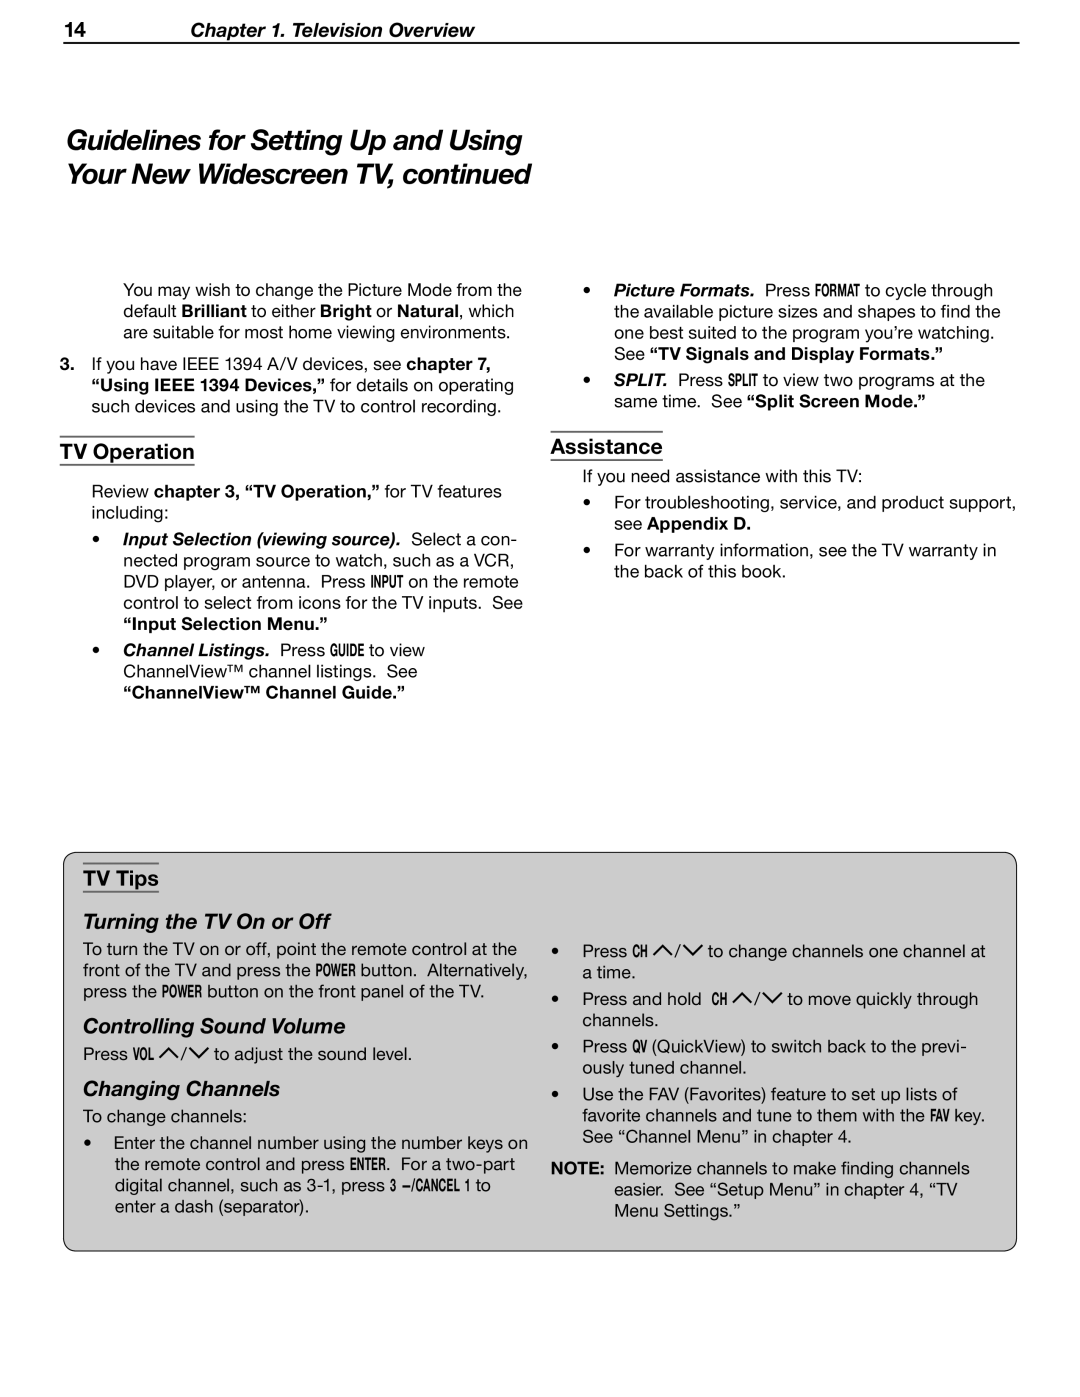 Mitsubishi Electronics LT-37131 manual Guidelines for Setting Up and Using Your New Widescreen TV, continued, TV Operation 